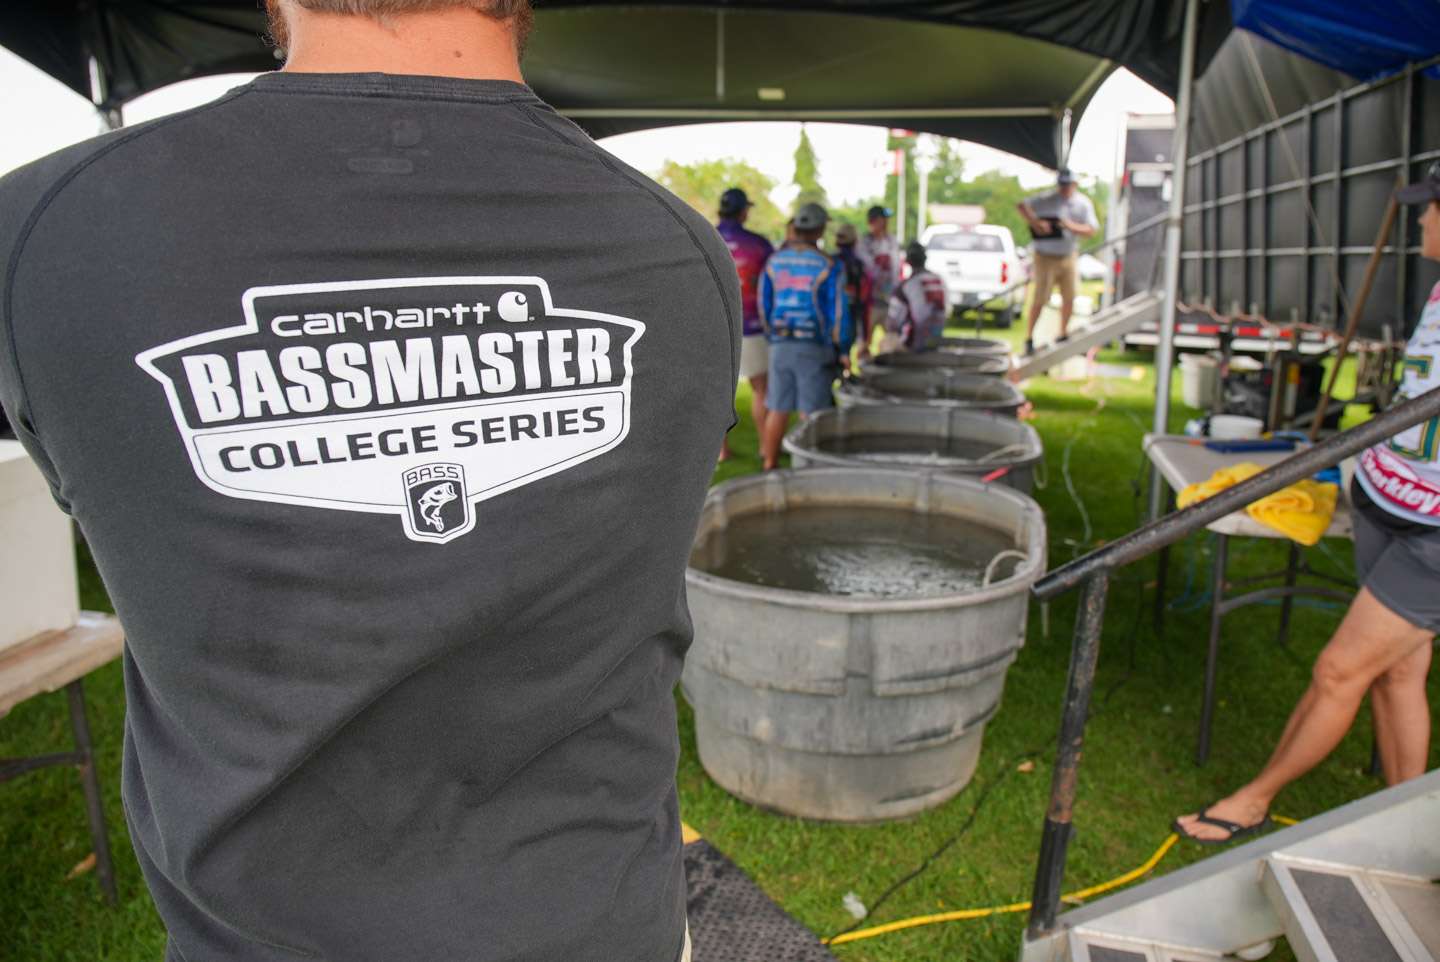 Day 1 behind the scenes action for the 2021 Carhartt Bassmaster College Series National Championship presented by Bass Pro Shops!